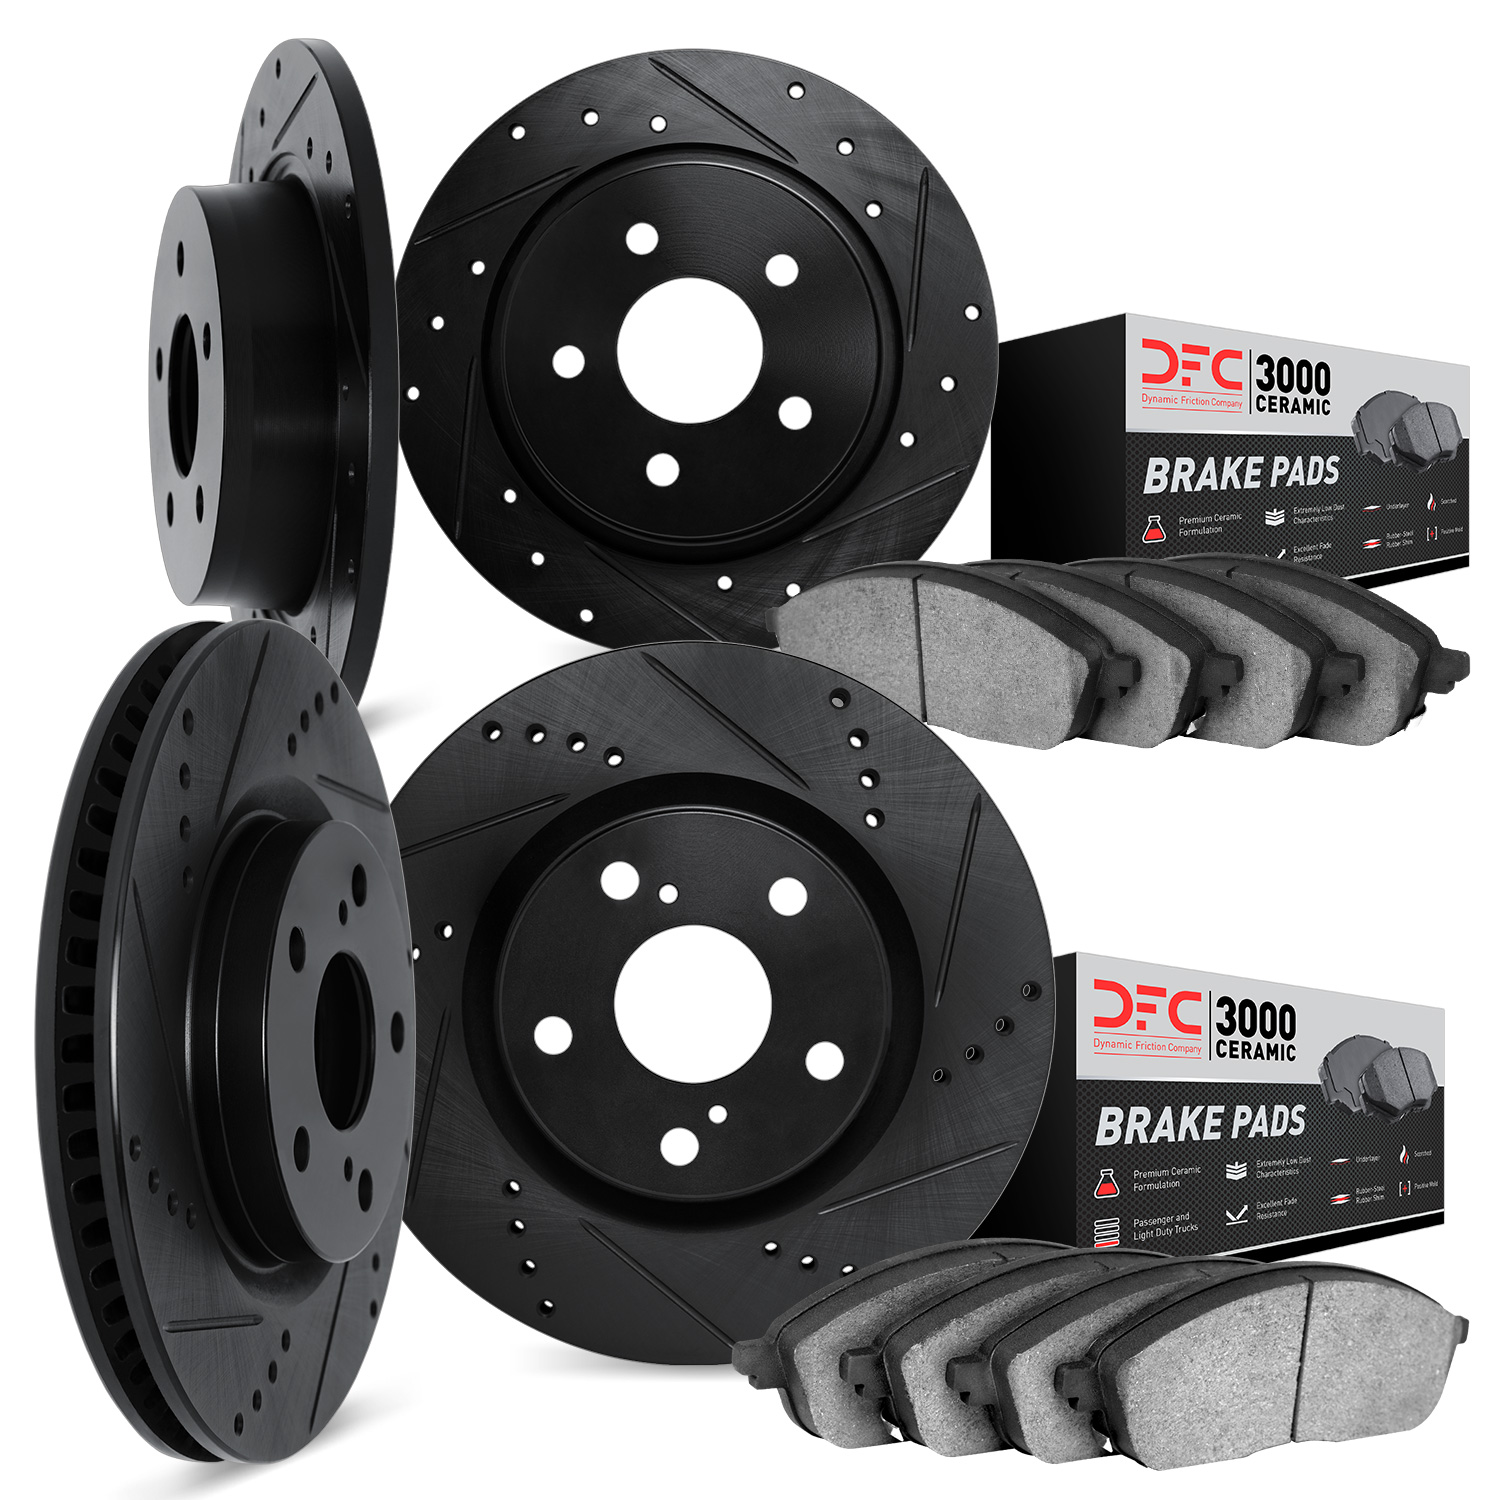 8304-42013 Drilled/Slotted Brake Rotors with 3000-Series Ceramic Brake Pads Kit [Black], 2012-2018 Mopar, Position: Front and Re